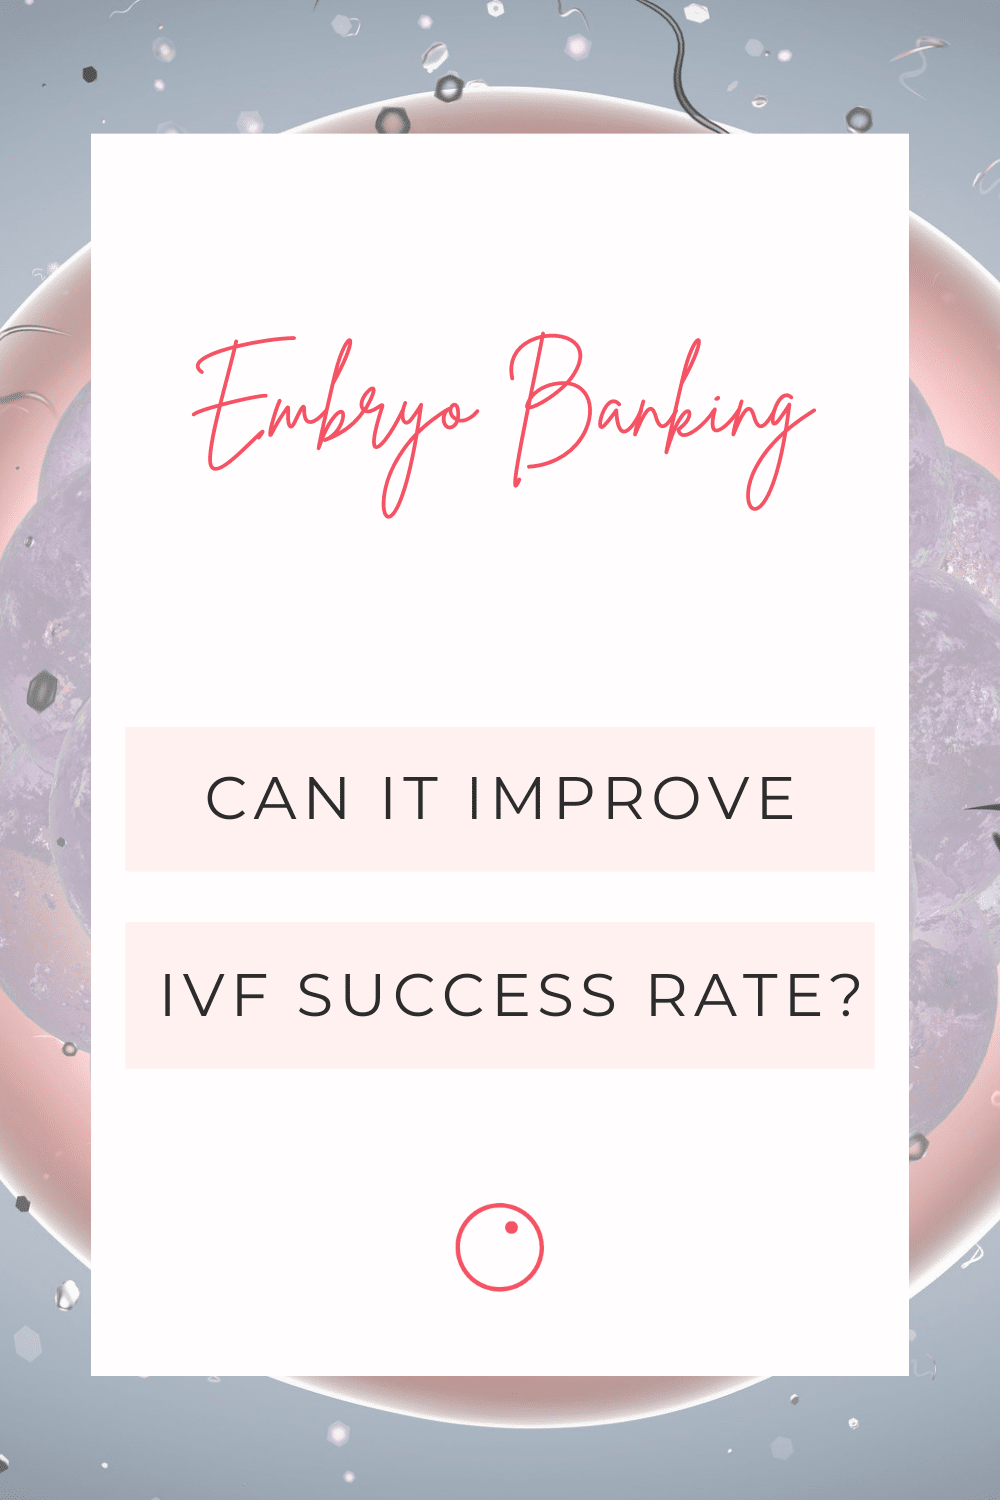 Embryo Banking for IVF Success